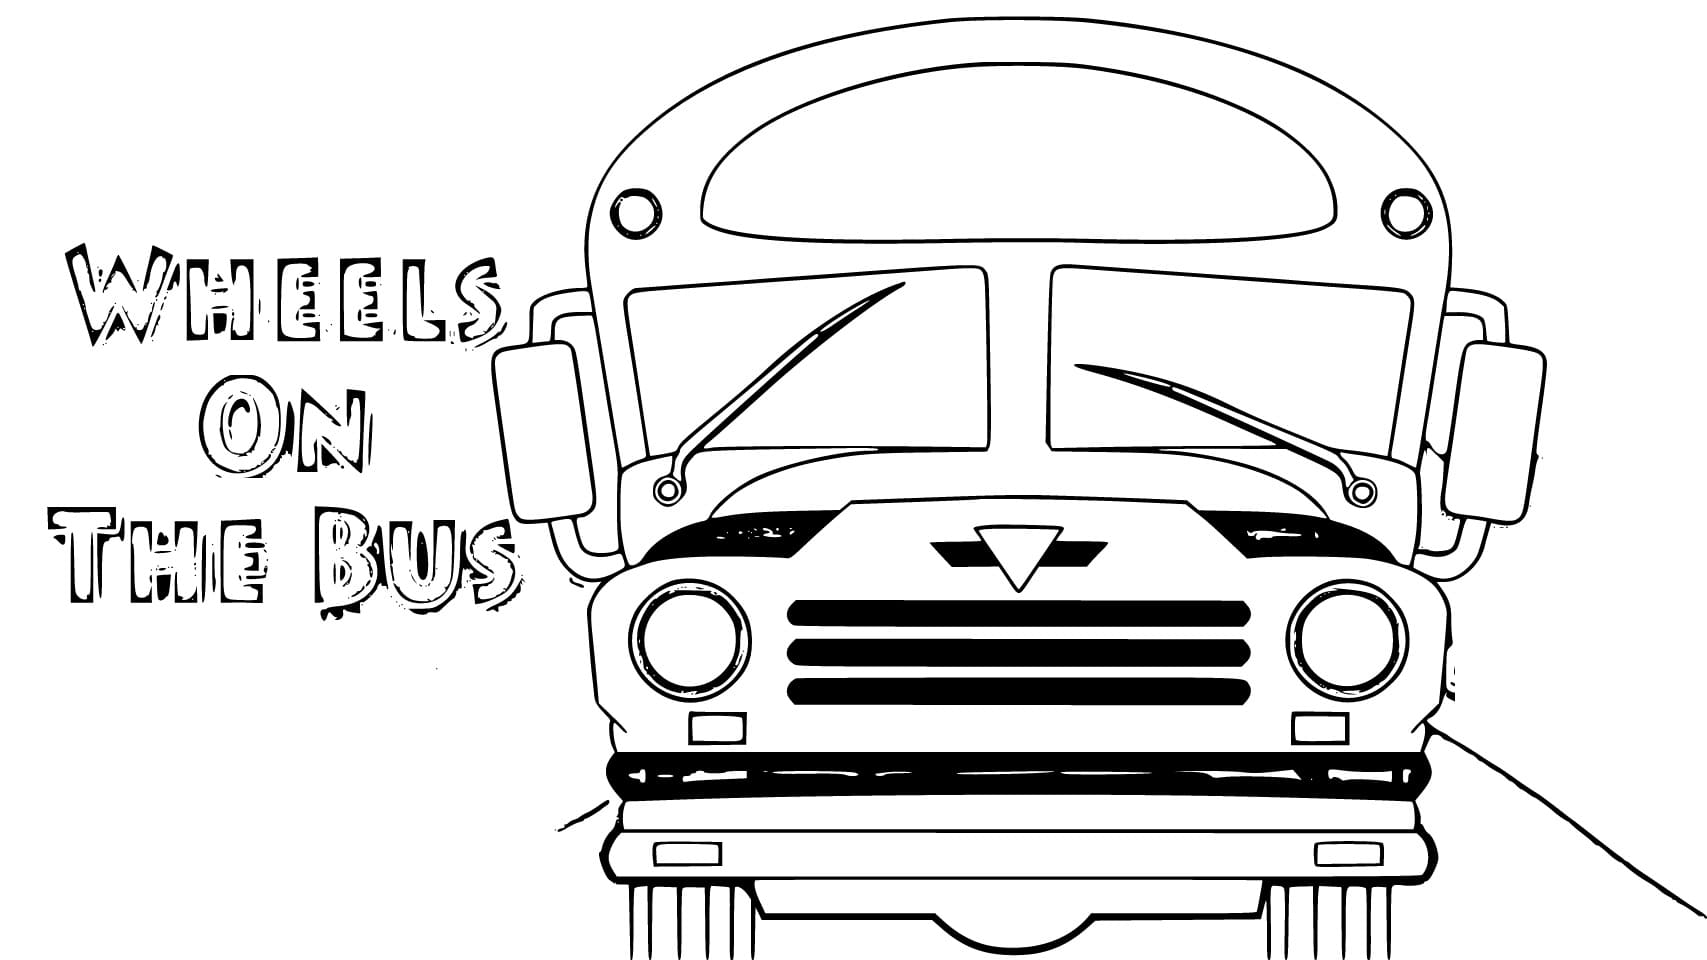 Wheel on the bus coloring page